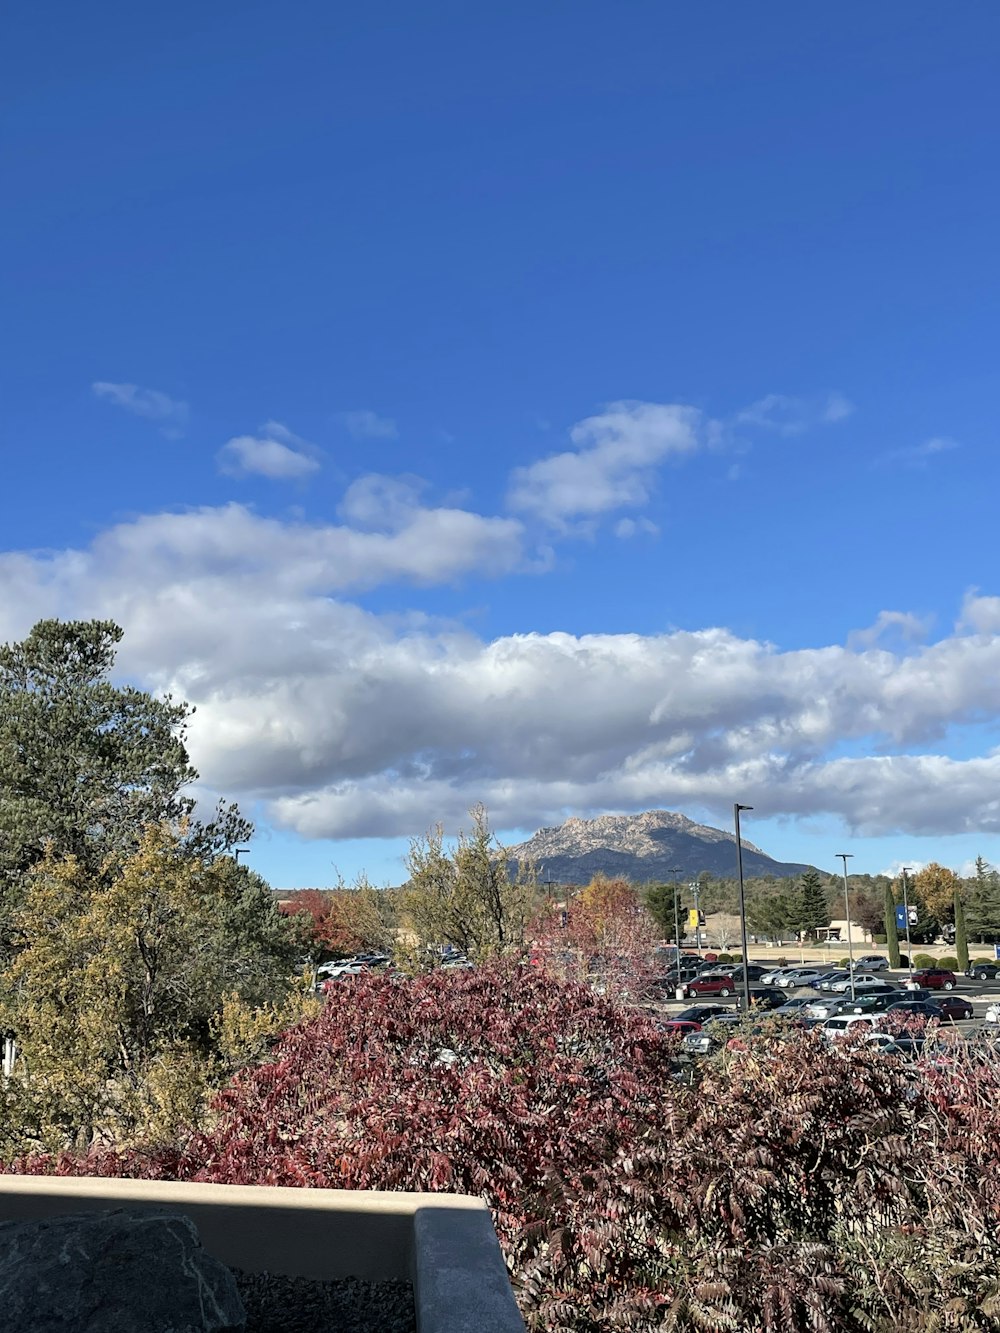 a view of a parking lot with a mountain in the background